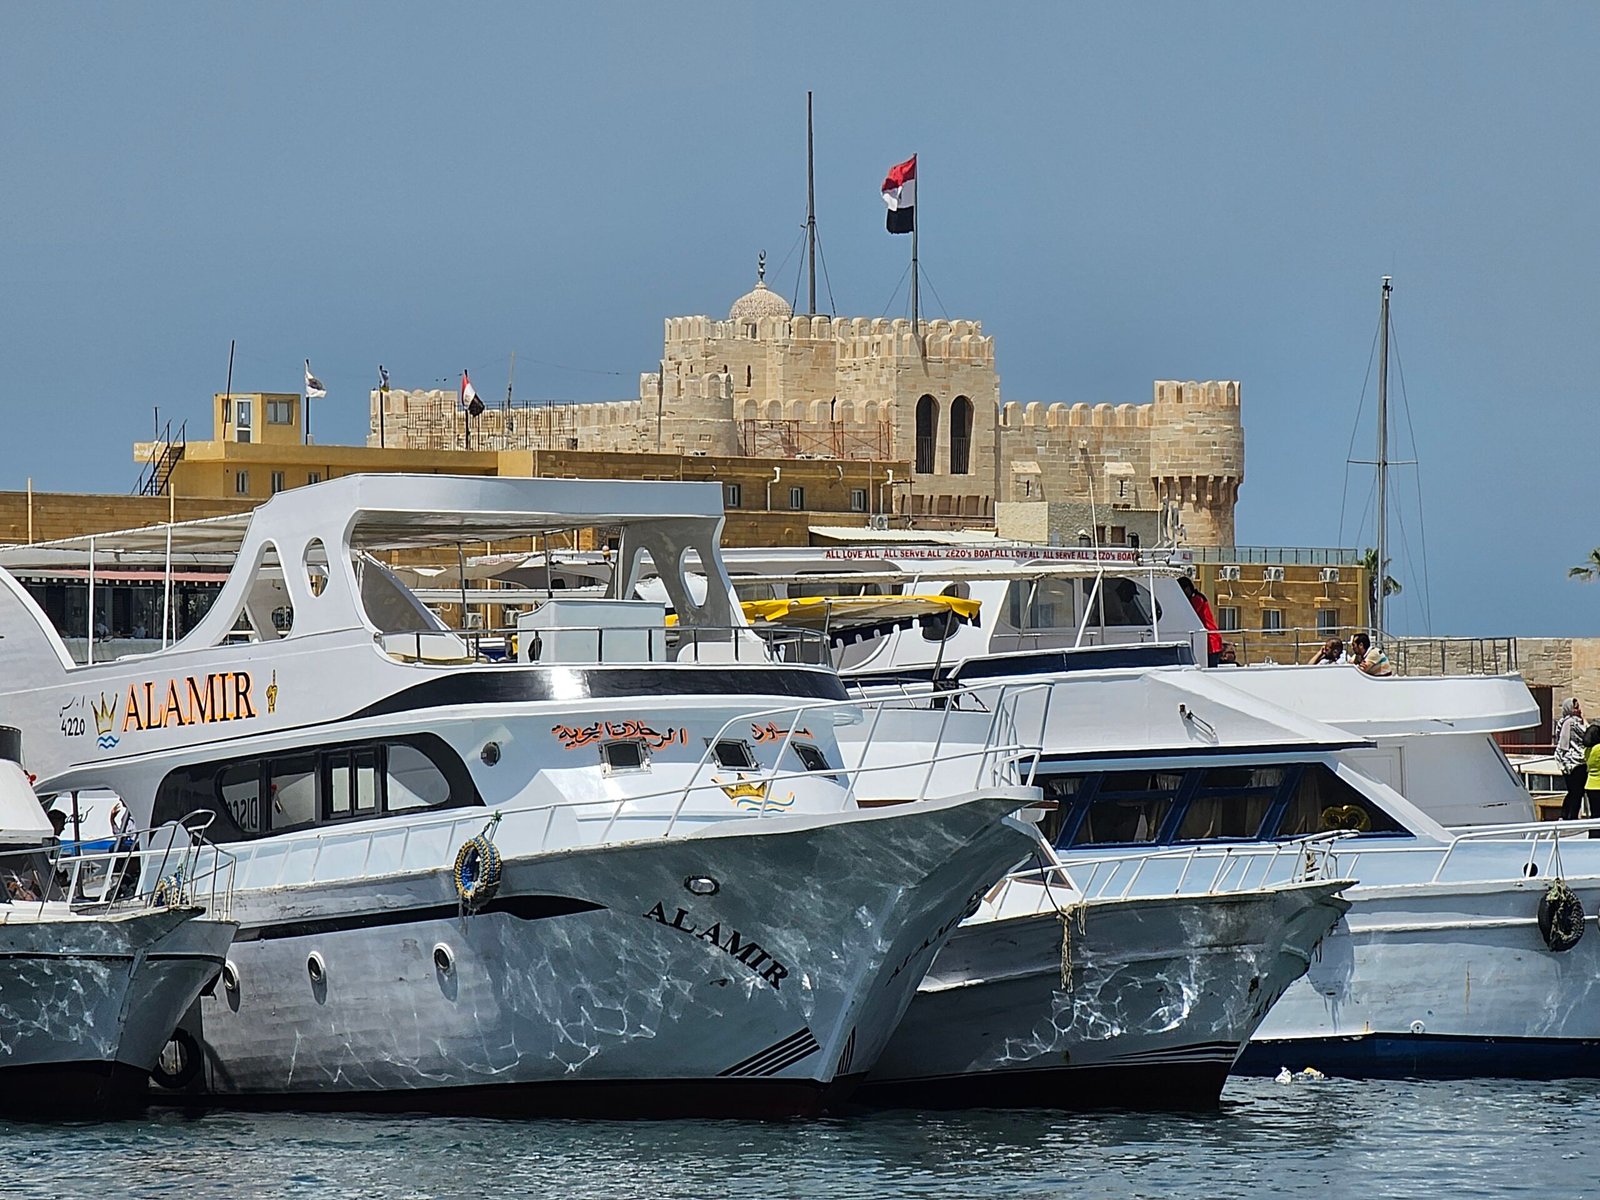 Experience the beauty of Alexandria like never before with a private boat trip. Explore the stunning coastline, historical landmarks, and crystal-clear waters on your own personalized adventure. Book your private boat trip today and create memories that will last a lifetime.